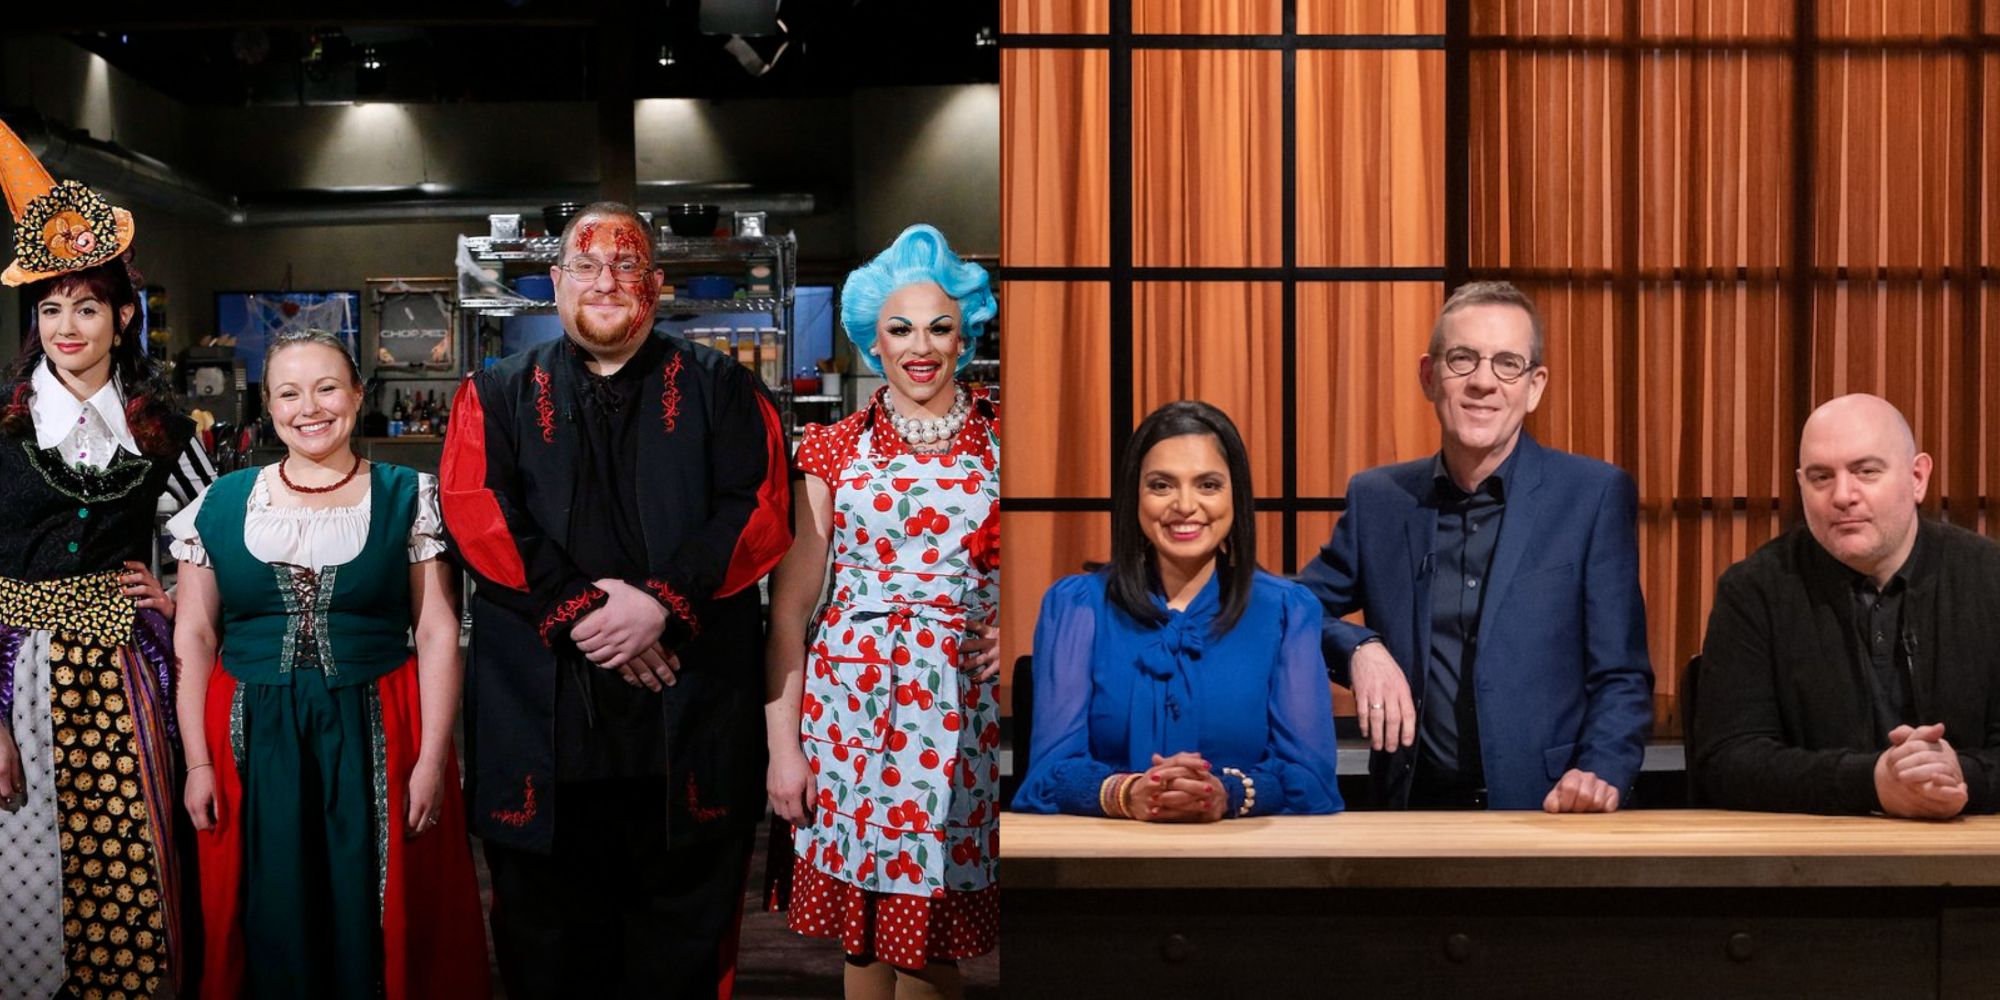 Split image of the Chopped judges and contestants from a Halloween themed episode